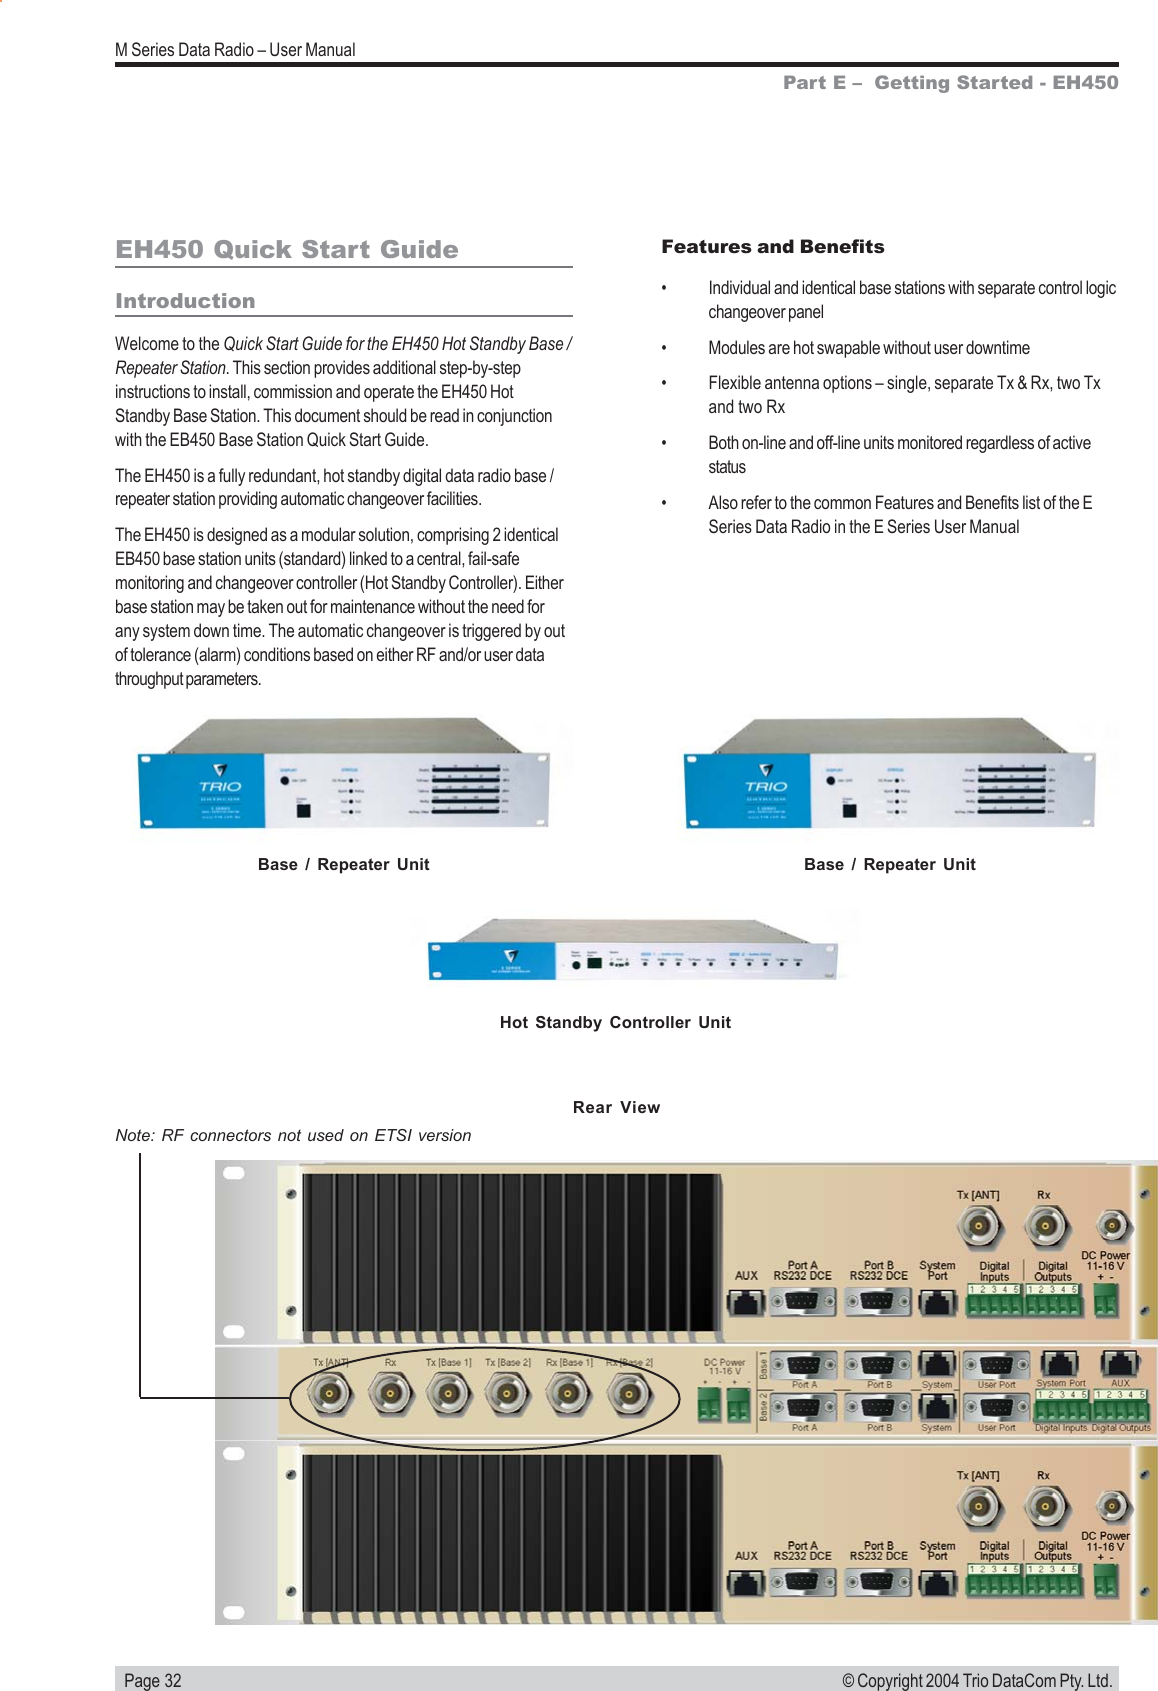   Page 32M Series Data Radio – User Manual© Copyright 2004 Trio DataCom Pty. Ltd.EH450 Quick Start GuideIntroductionWelcome to the Quick Start Guide for the EH450 Hot Standby Base /Repeater Station. This section provides additional step-by-stepinstructions to install, commission and operate the EH450 HotStandby Base Station. This document should be read in conjunctionwith the EB450 Base Station Quick Start Guide.The EH450 is a fully redundant, hot standby digital data radio base /repeater station providing automatic changeover facilities.The EH450 is designed as a modular solution, comprising 2 identicalEB450 base station units (standard) linked to a central, fail-safemonitoring and changeover controller (Hot Standby Controller). Eitherbase station may be taken out for maintenance without the need forany system down time. The automatic changeover is triggered by outof tolerance (alarm) conditions based on either RF and/or user datathroughput parameters.Part E –  Getting Started - EH450Features and Benefits• Individual and identical base stations with separate control logicchangeover panel• Modules are hot swapable without user downtime• Flexible antenna options – single, separate Tx &amp; Rx, two Txand two Rx• Both on-line and off-line units monitored regardless of activestatus• Also refer to the common Features and Benefits list of the ESeries Data Radio in the E Series User ManualBase / Repeater UnitHot Standby Controller UnitBase / Repeater UnitNote: RF connectors not used on ETSI versionRear View